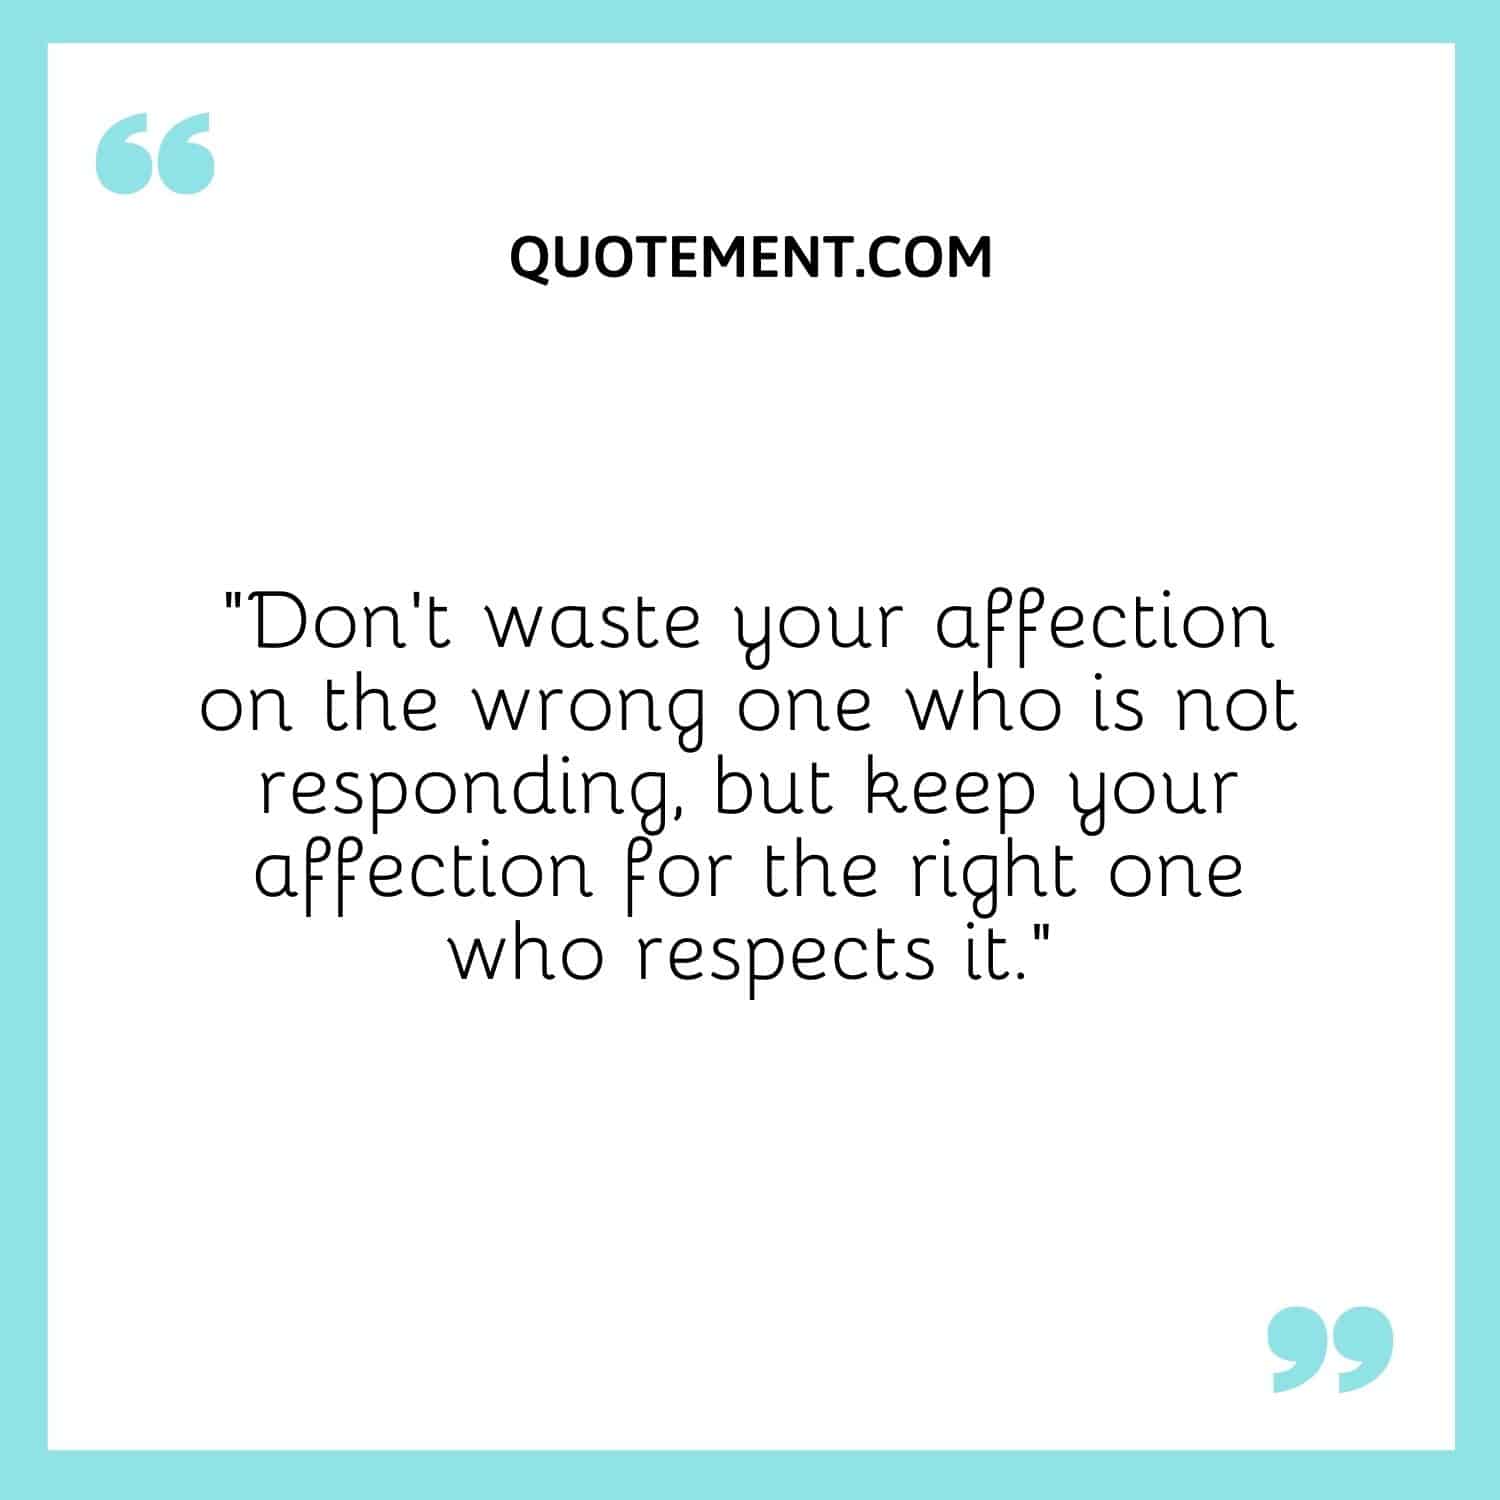 Don’t waste your affection on the wrong one who is not responding